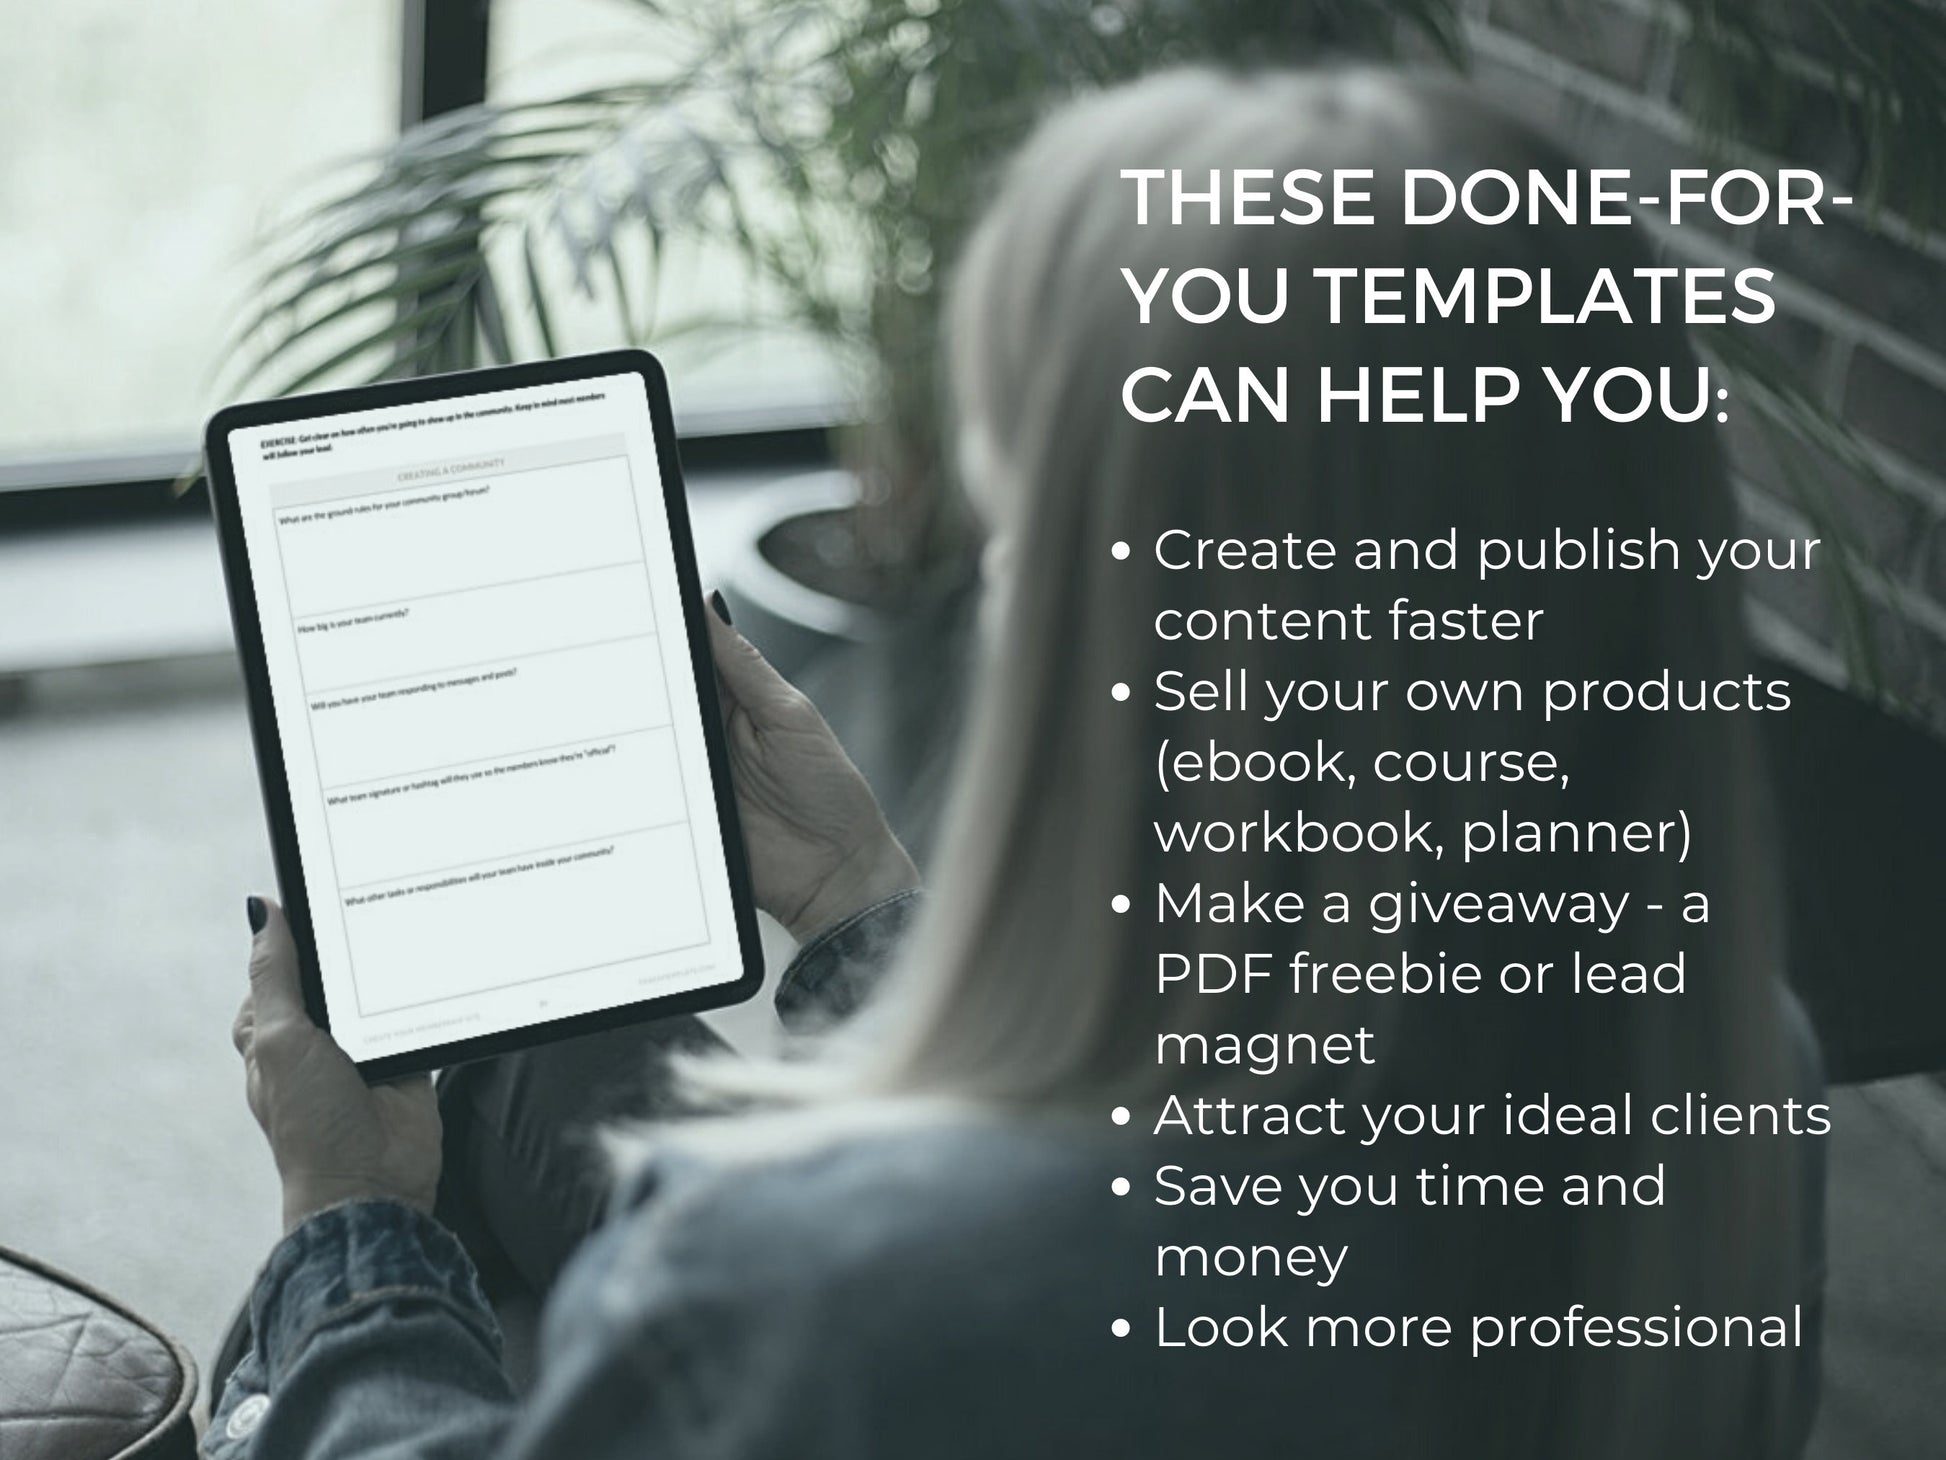 Teal Course eBook Template Canva for Content Creator | Life Coach Business Wellness Holistic Spiritual Canva template | ebook PDF workbook